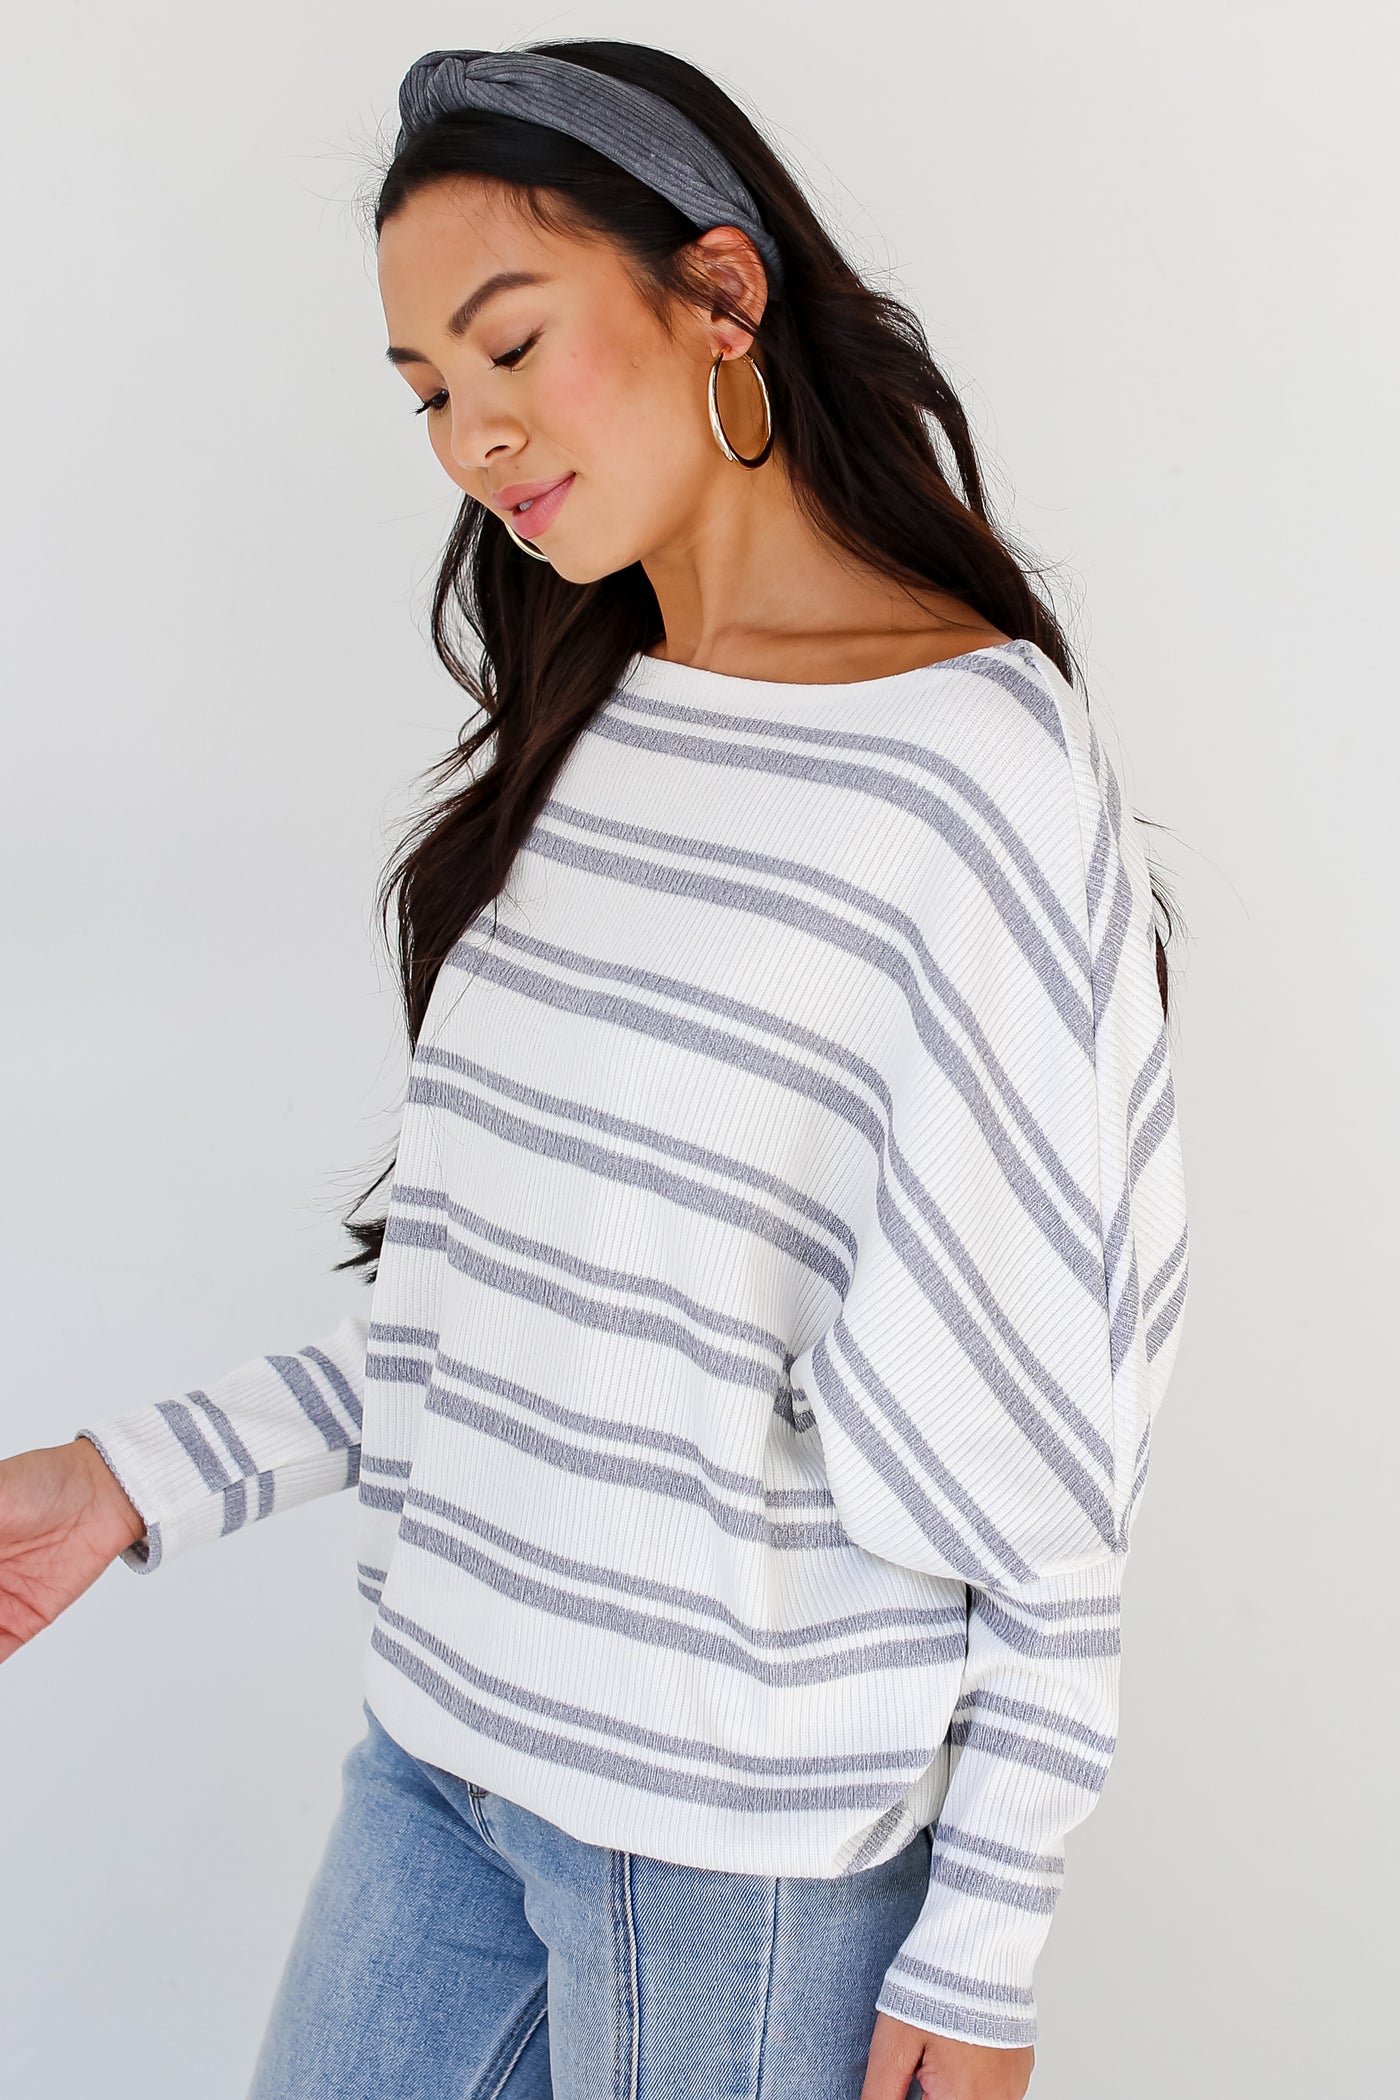 grey Striped Knit Top side view